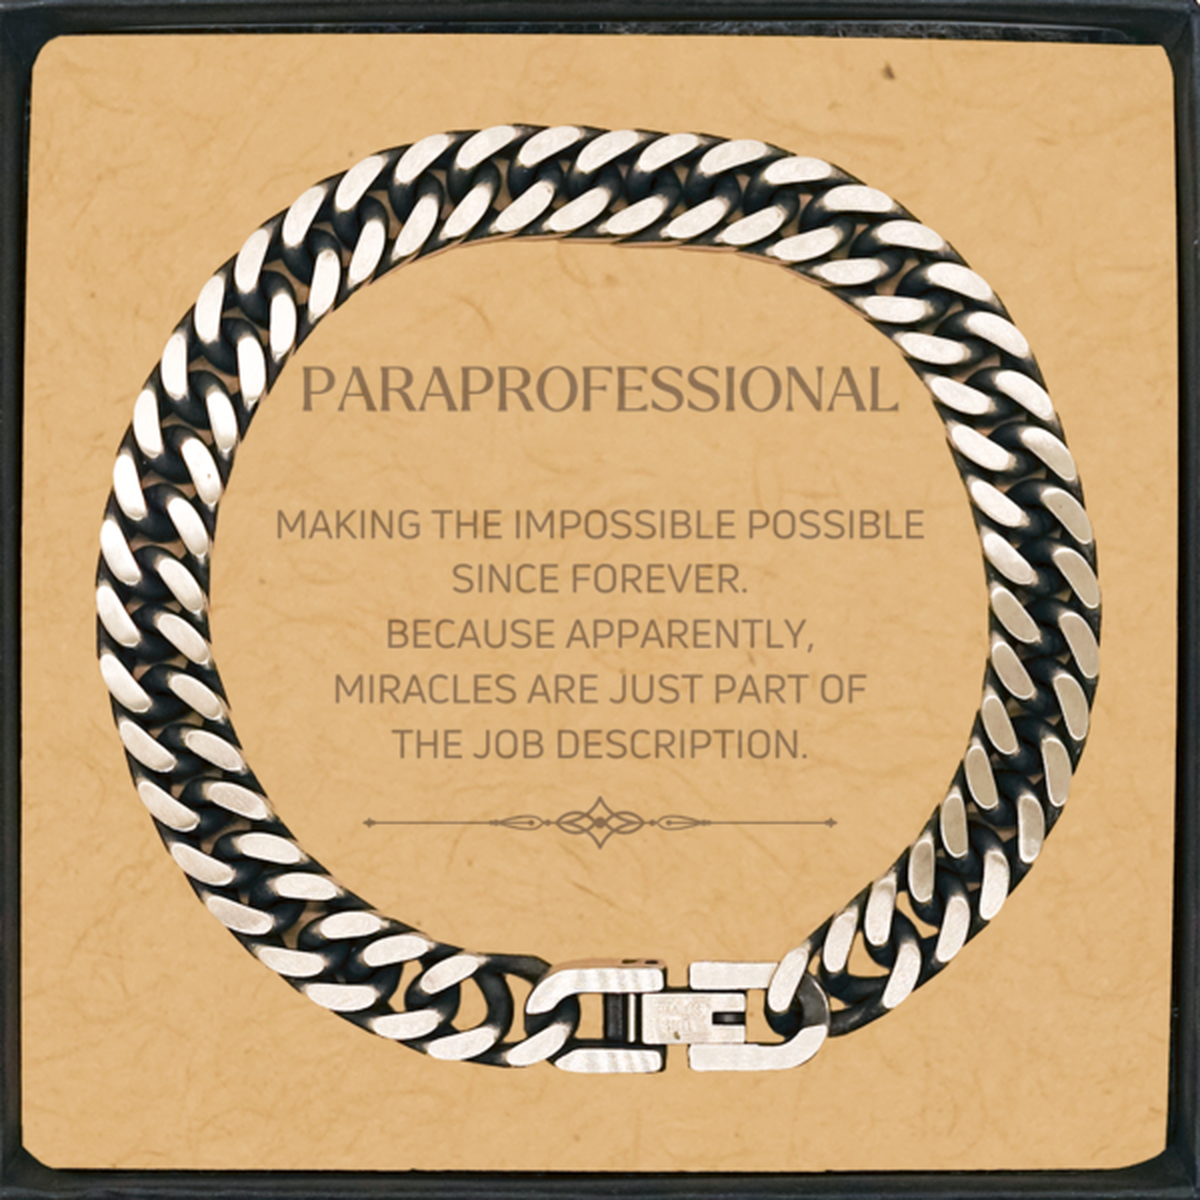 Funny Paraprofessional Gifts, Miracles are just part of the job description, Inspirational Birthday Cuban Link Chain Bracelet For Paraprofessional, Men, Women, Coworkers, Friends, Boss